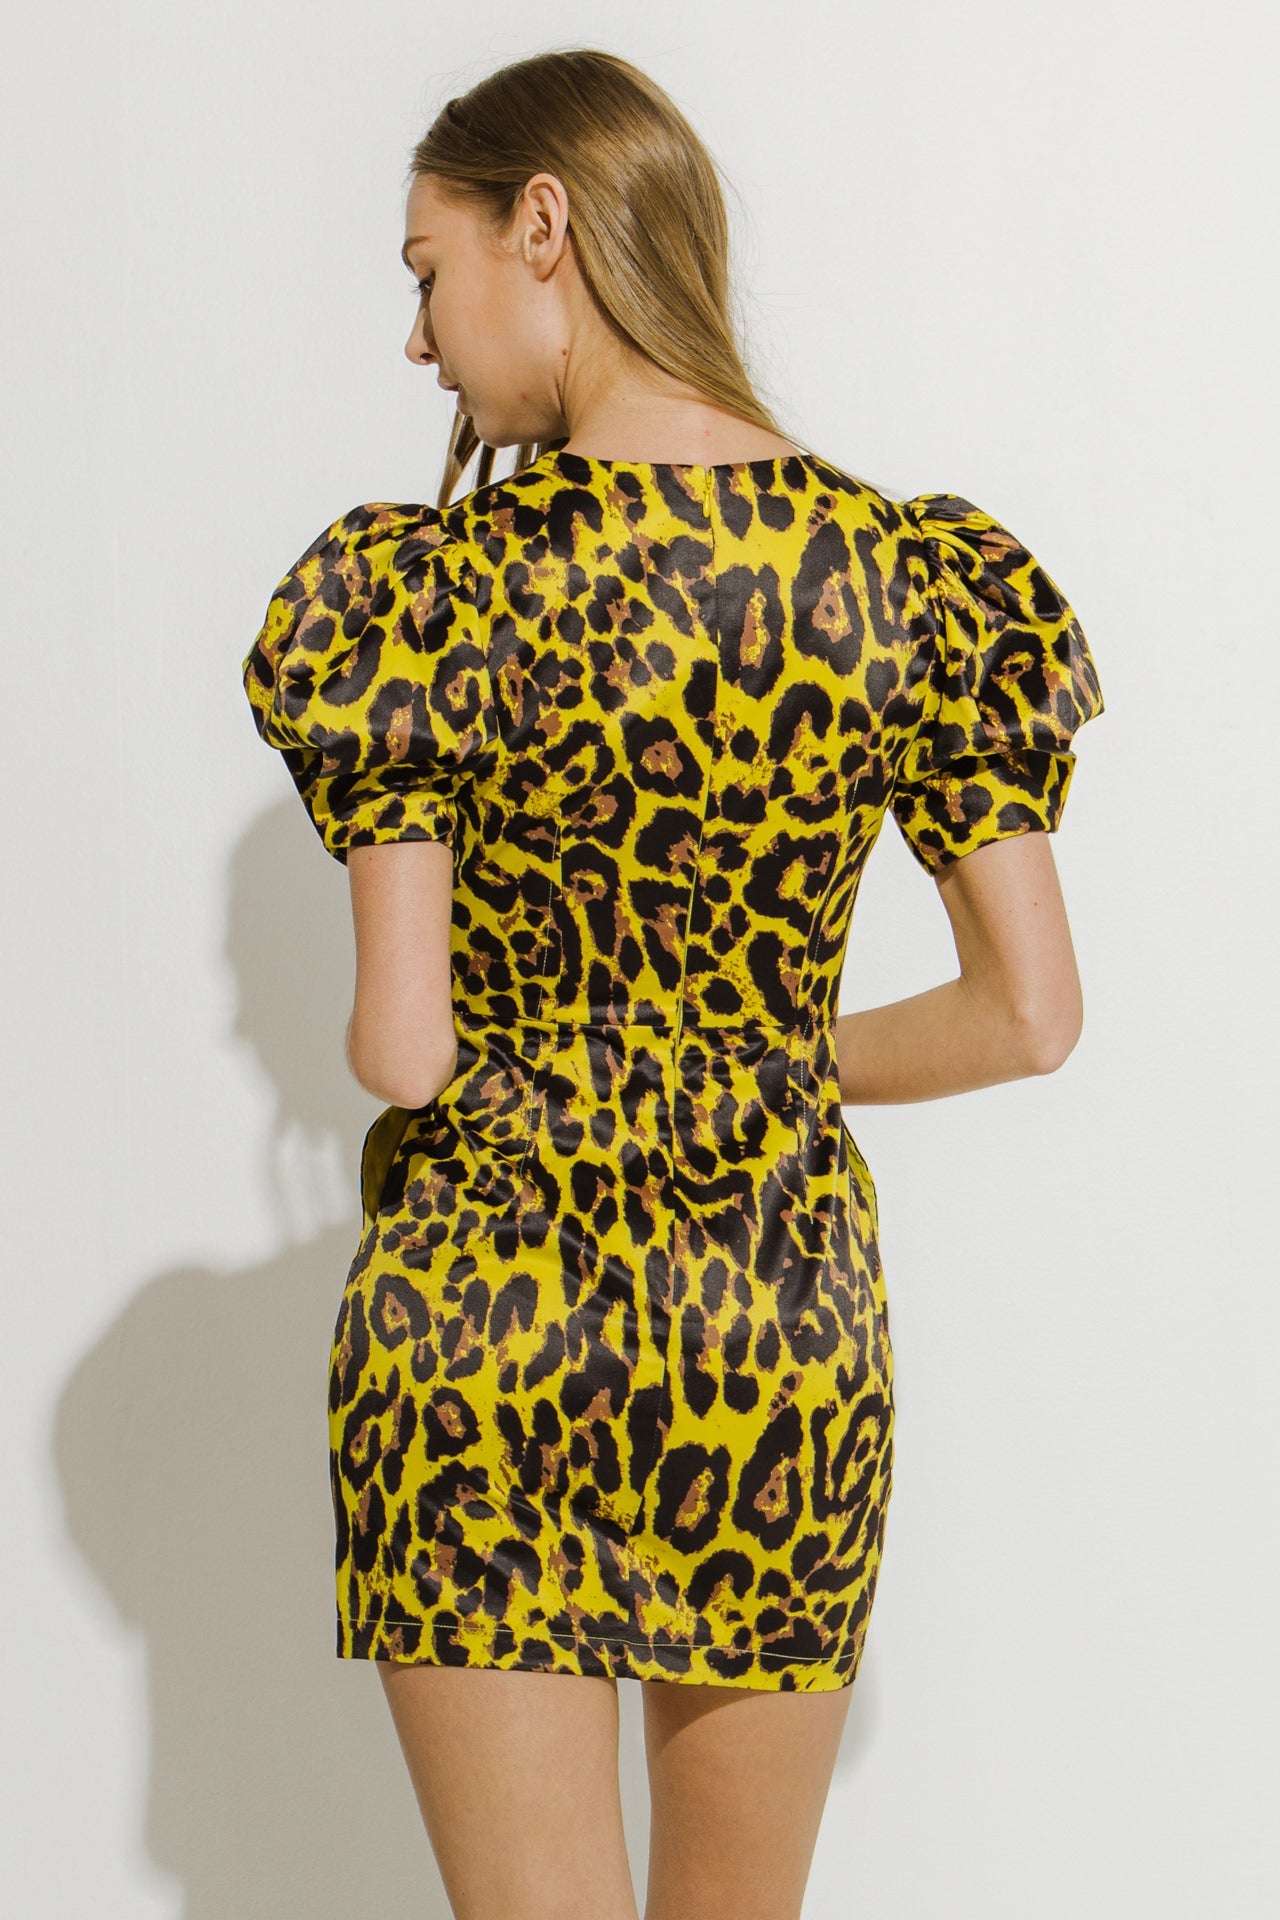 ENDLESS ROSE - Leopard Print Mini Dress - DRESSES available at Objectrare